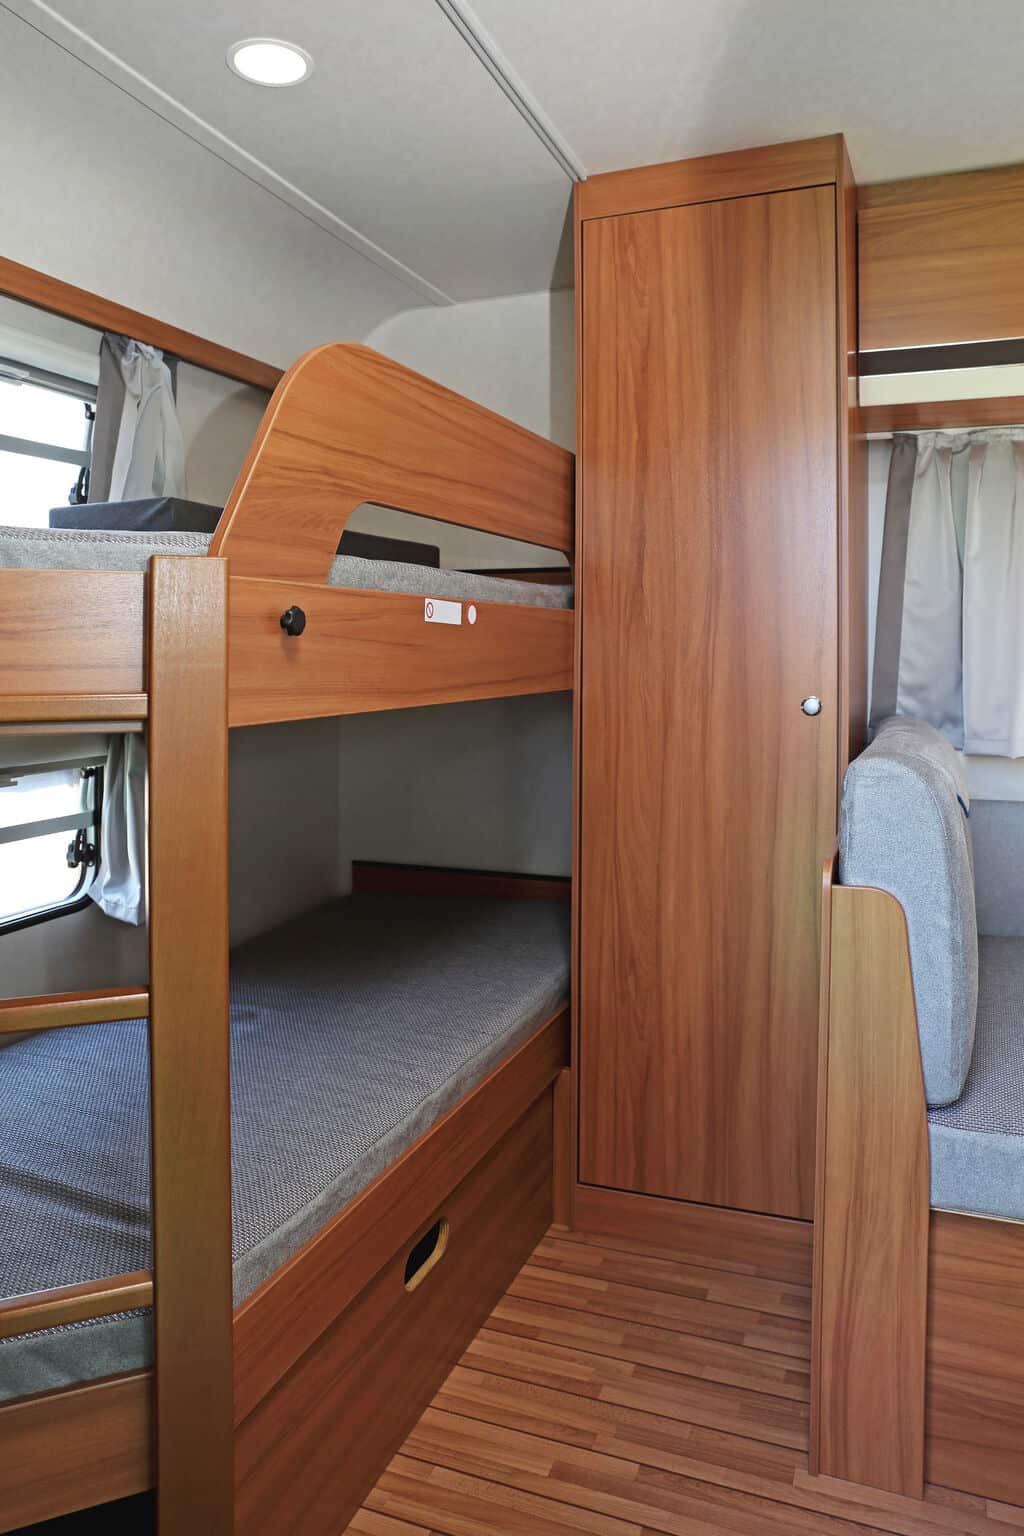 5 Travel Trailers With Quad Bunkhouse, Rv With Full Size Bunk Beds